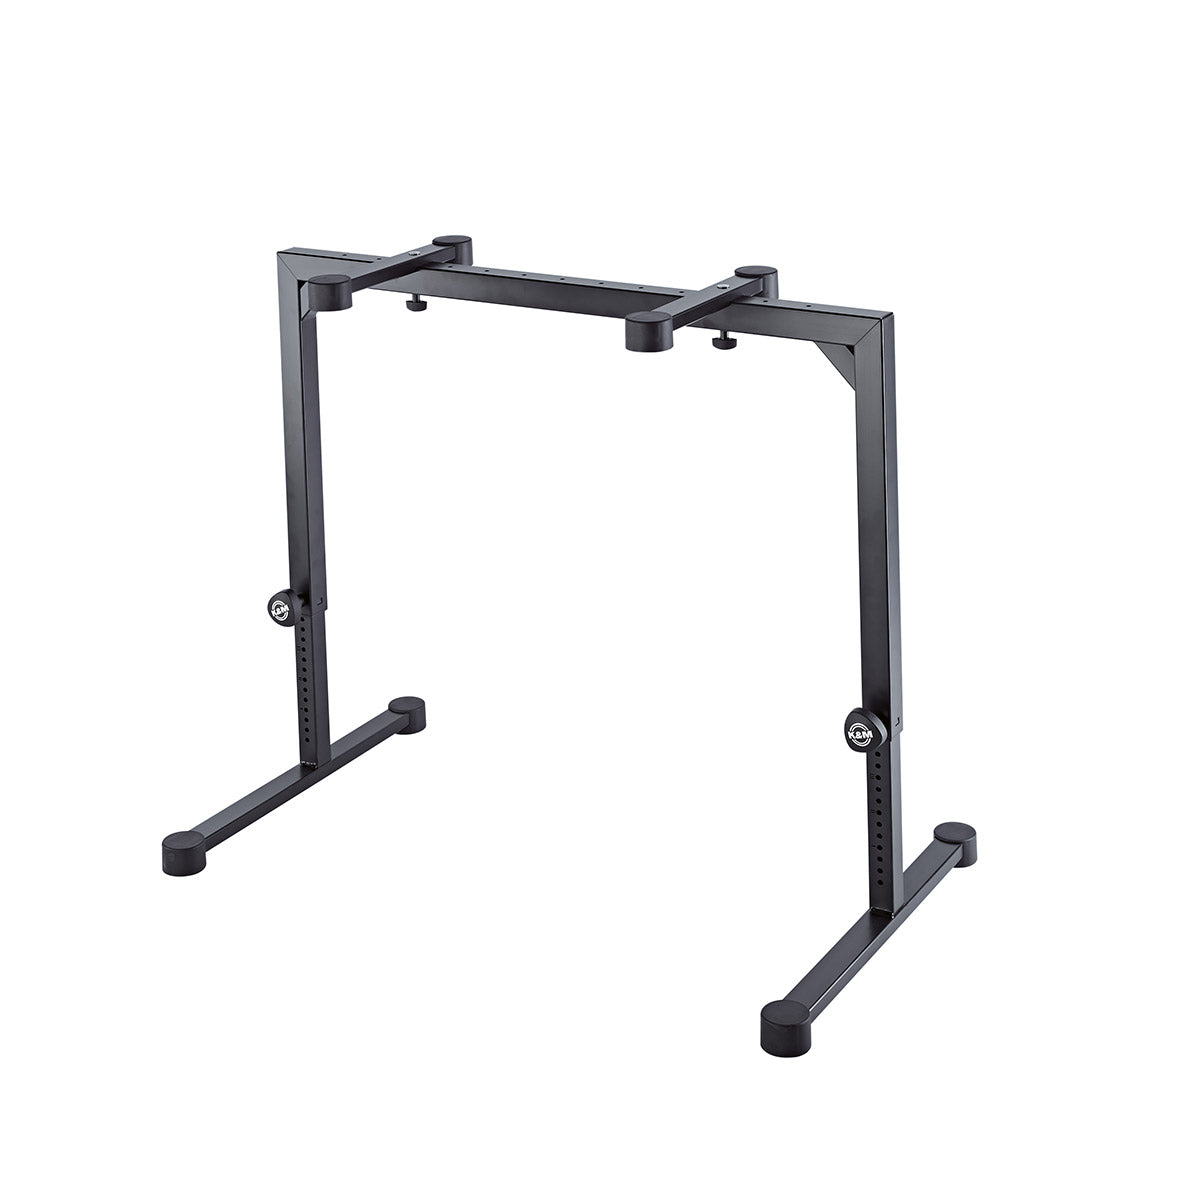 KM 18810 Table-style keyboard stand Table-style keyboard stand